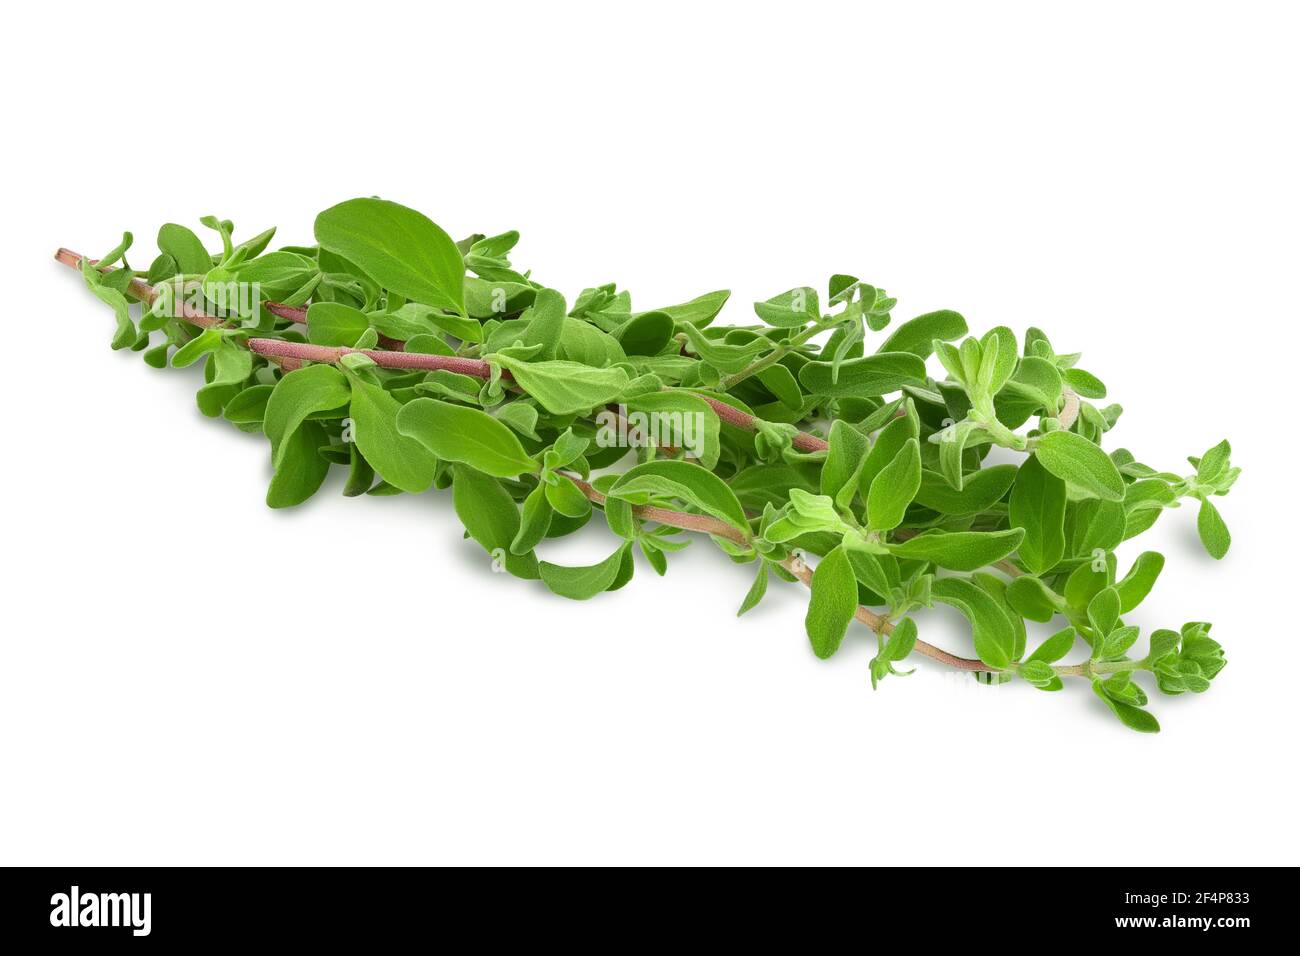 Oregano or marjoram leaves isolated on white background with clipping path and full depth of field Stock Photo